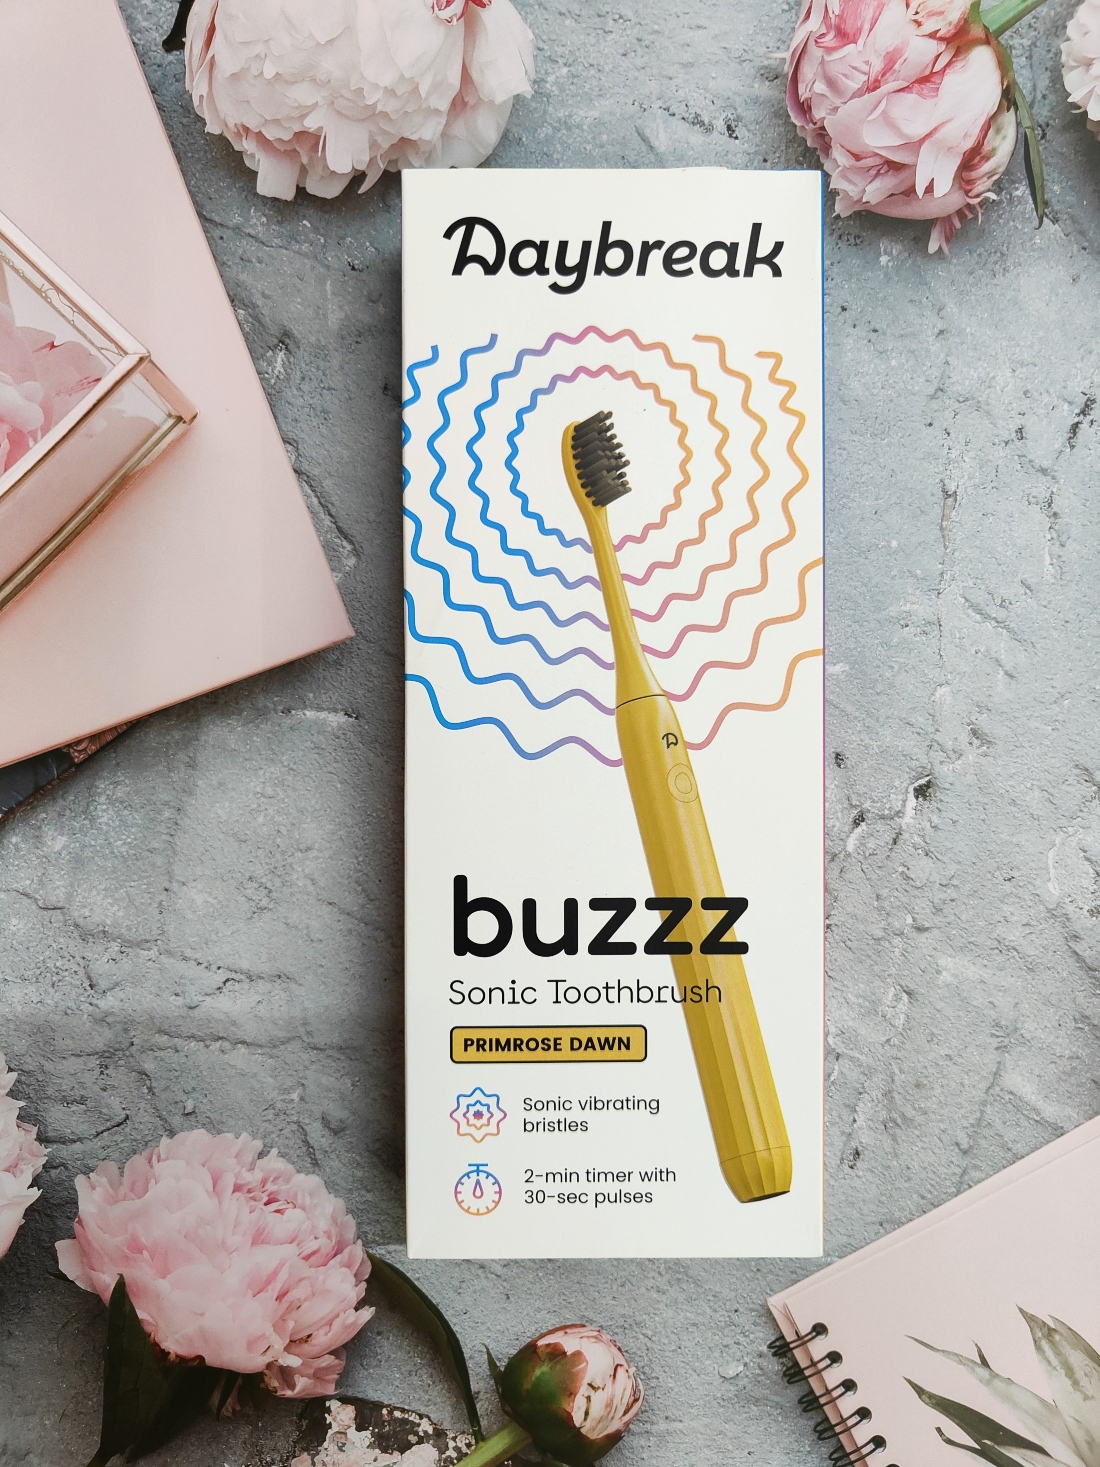 Daybreak Buzz Electric tooth brush and Rinse Review